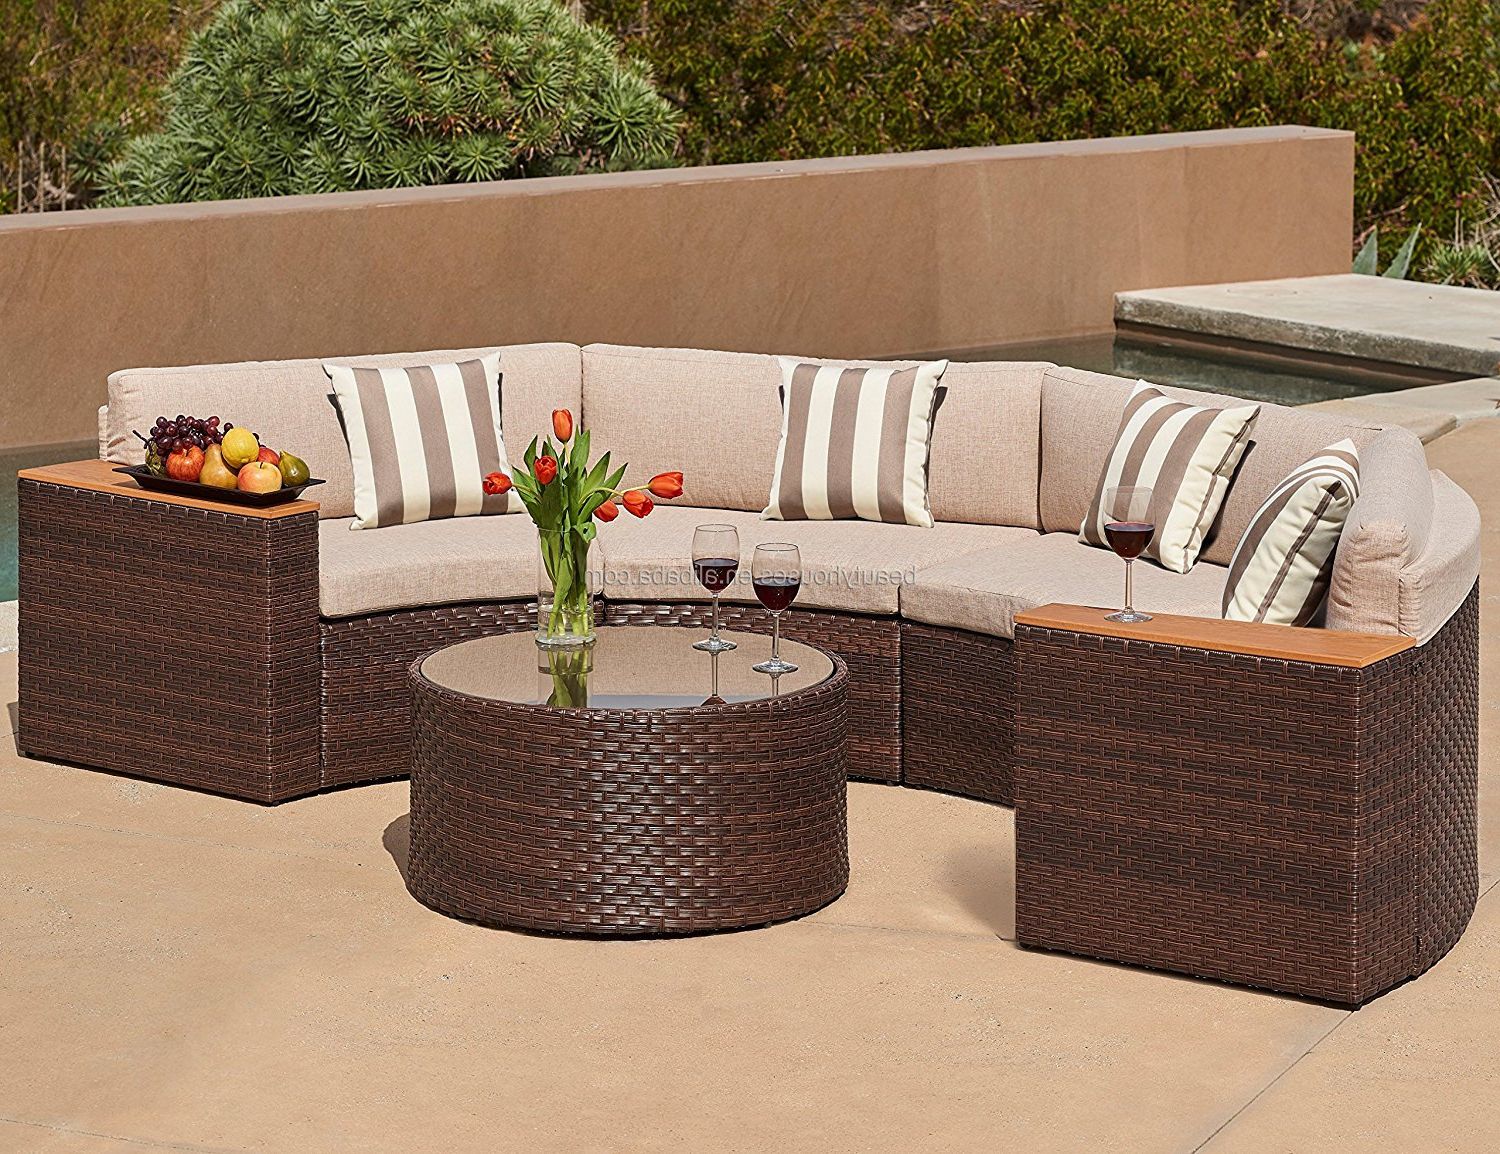 Fabric Outdoor Middle Chair Sets Regarding Widely Used Patio Furniture Half Round Rattan Sectional Sofa Set – Buy Patio (View 9 of 15)